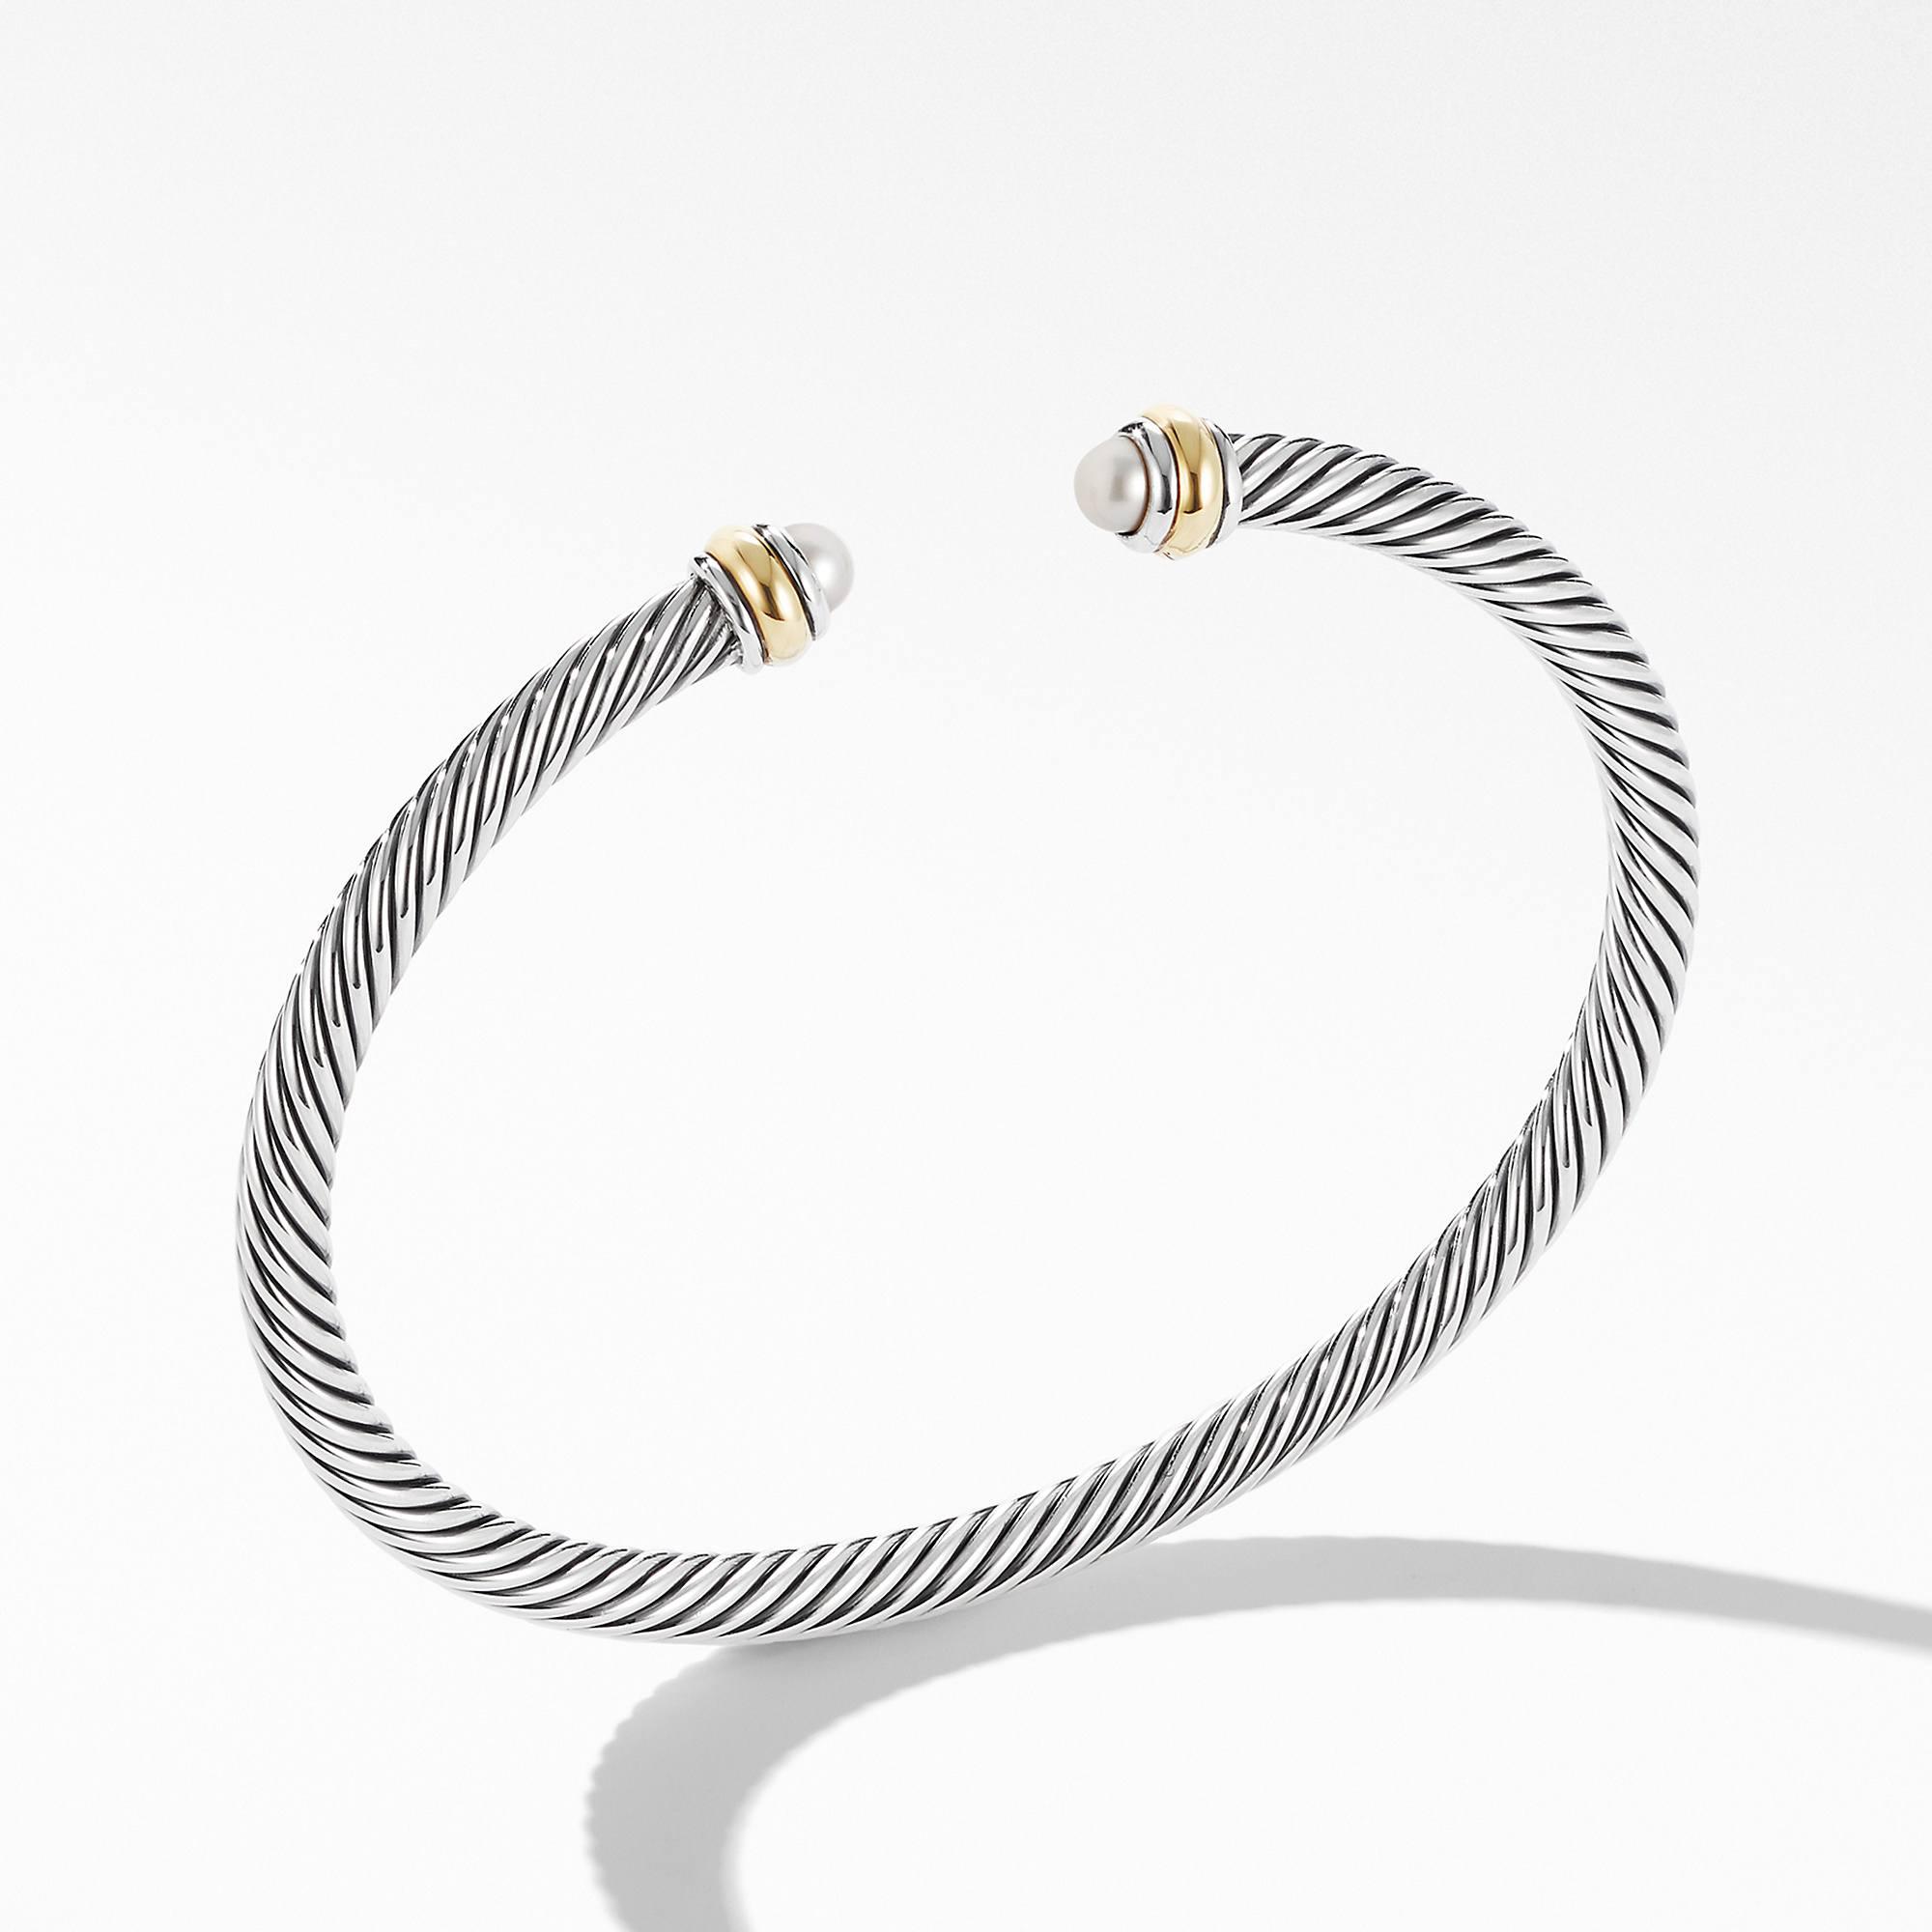 David Yurman Cable Classic 4mm Bracelet with Pearl and 18K Yellow Gold, size medium